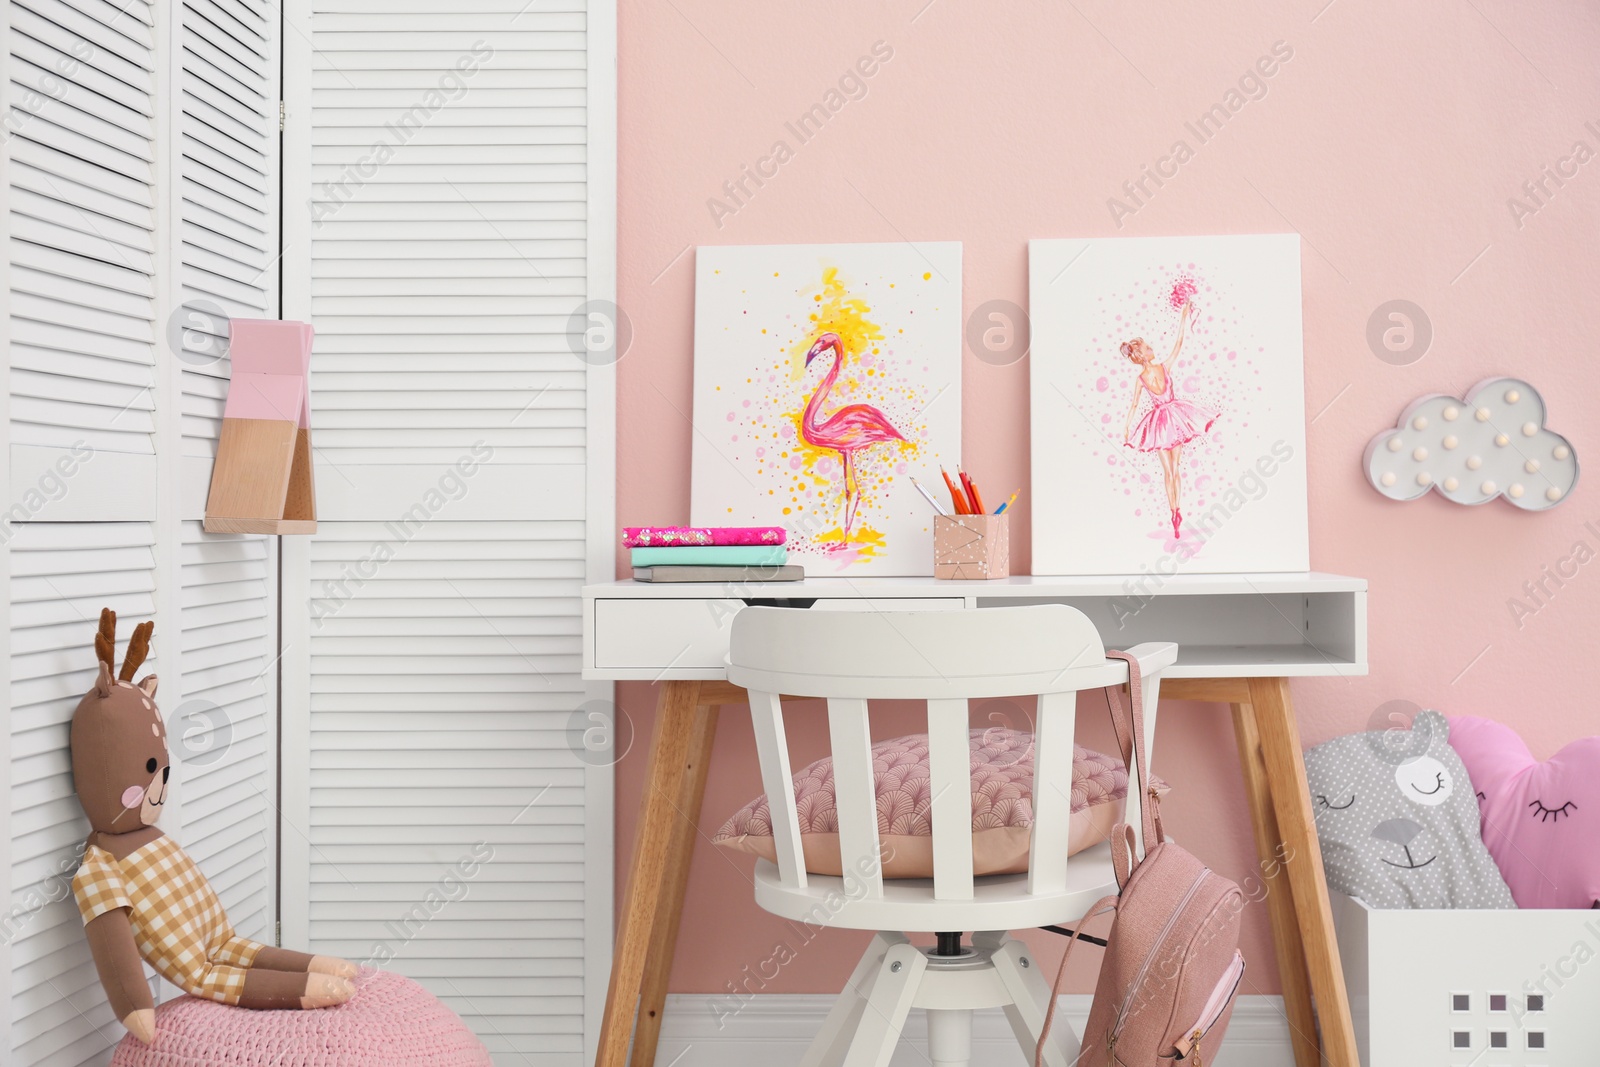 Photo of Stationery and pictures on white table in children's room. Interior design